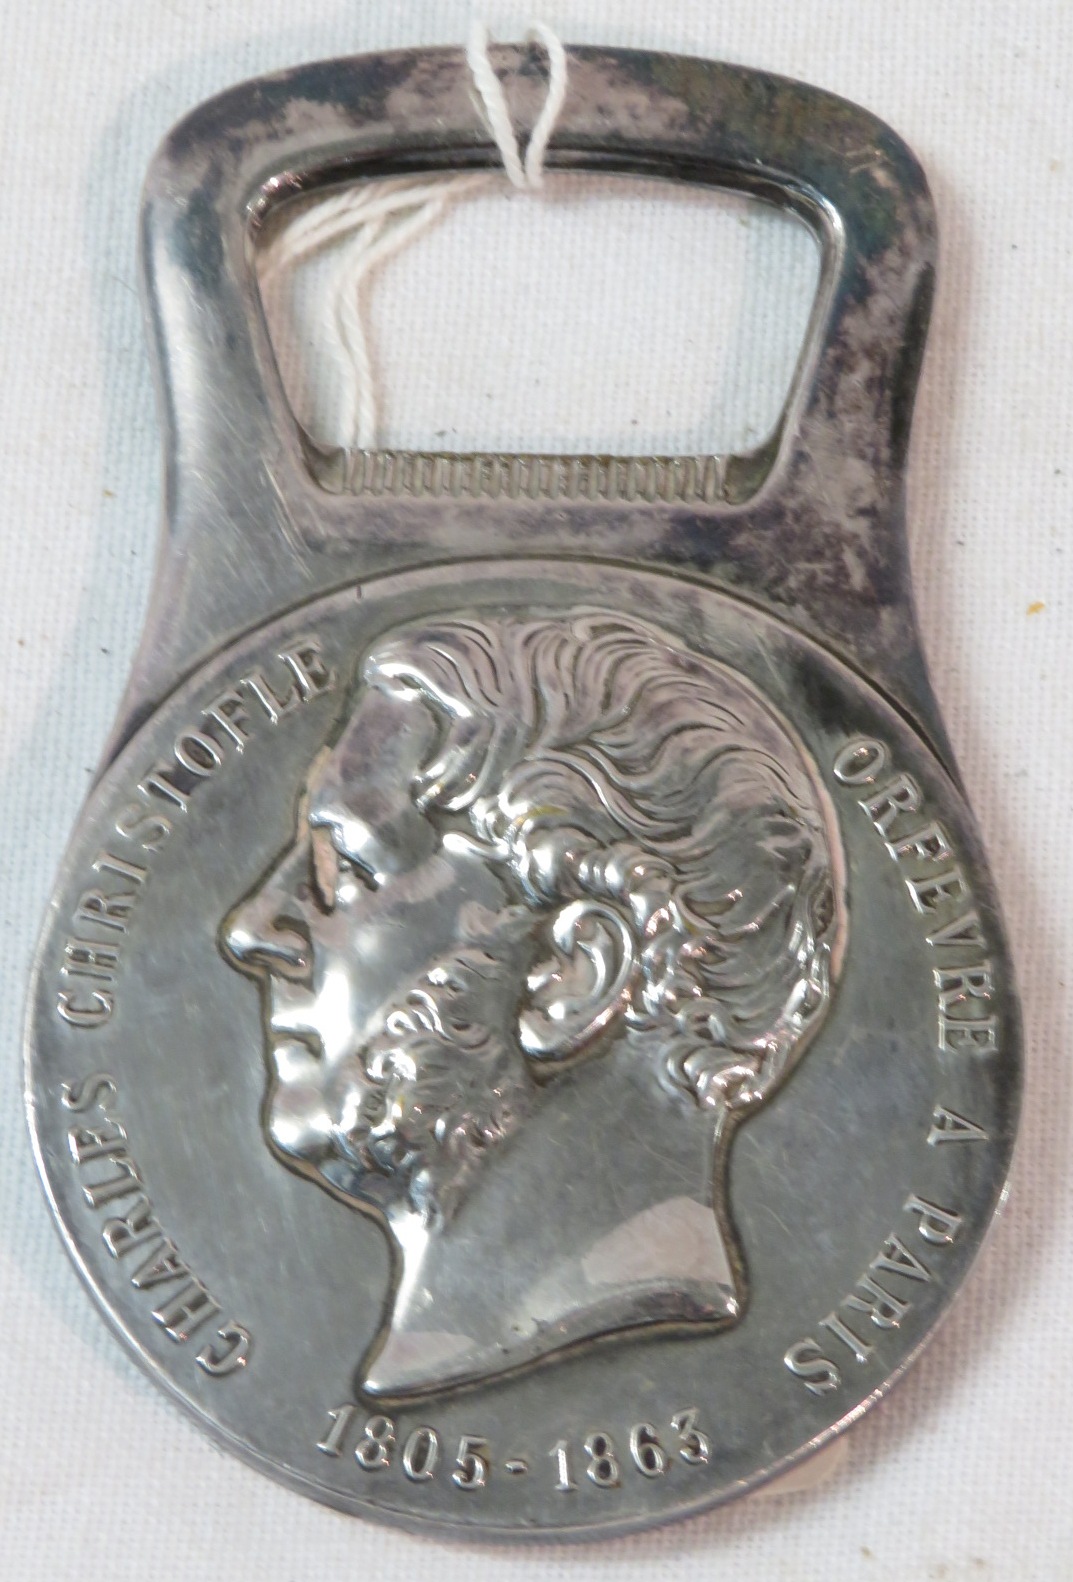 A bottle opener moulded with portrait head and marked CHARLES CHRISTOFLE ORFEVRE A PARIS 1805-